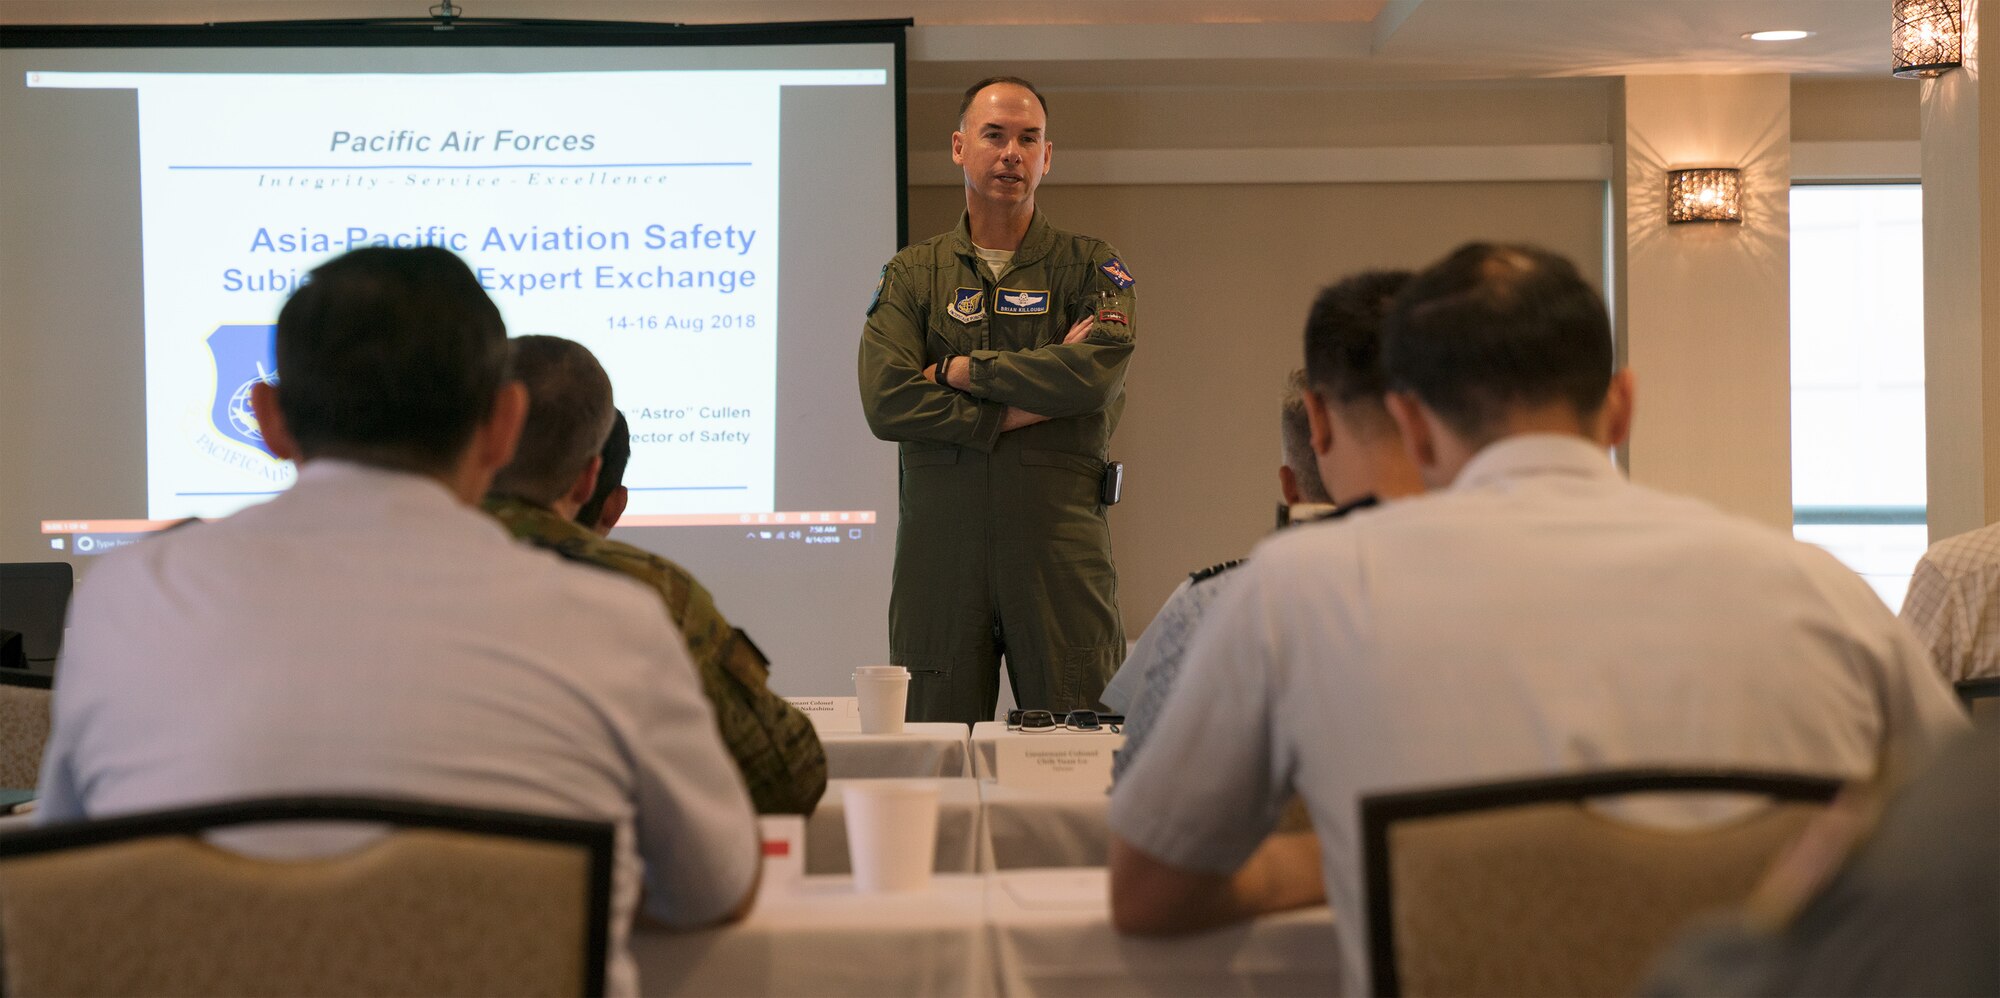 U.S. Air Force Maj. Gen. Brian M. Killough, Chief of Staff, Pacific Air Forces, provides opening remarks for the Asia-Pacific Aviation Safety Subject Matter Expert Exchange (APASS) in Honolulu, Hawaii, Aug. 14, 2018. APASS allows partner nations in the Indo-Pacific to discuss aviation safety practices and devise solutions to challenges faced by the various air forces. (U.S. Air Force photo by Staff Sgt. Daniel Robles)